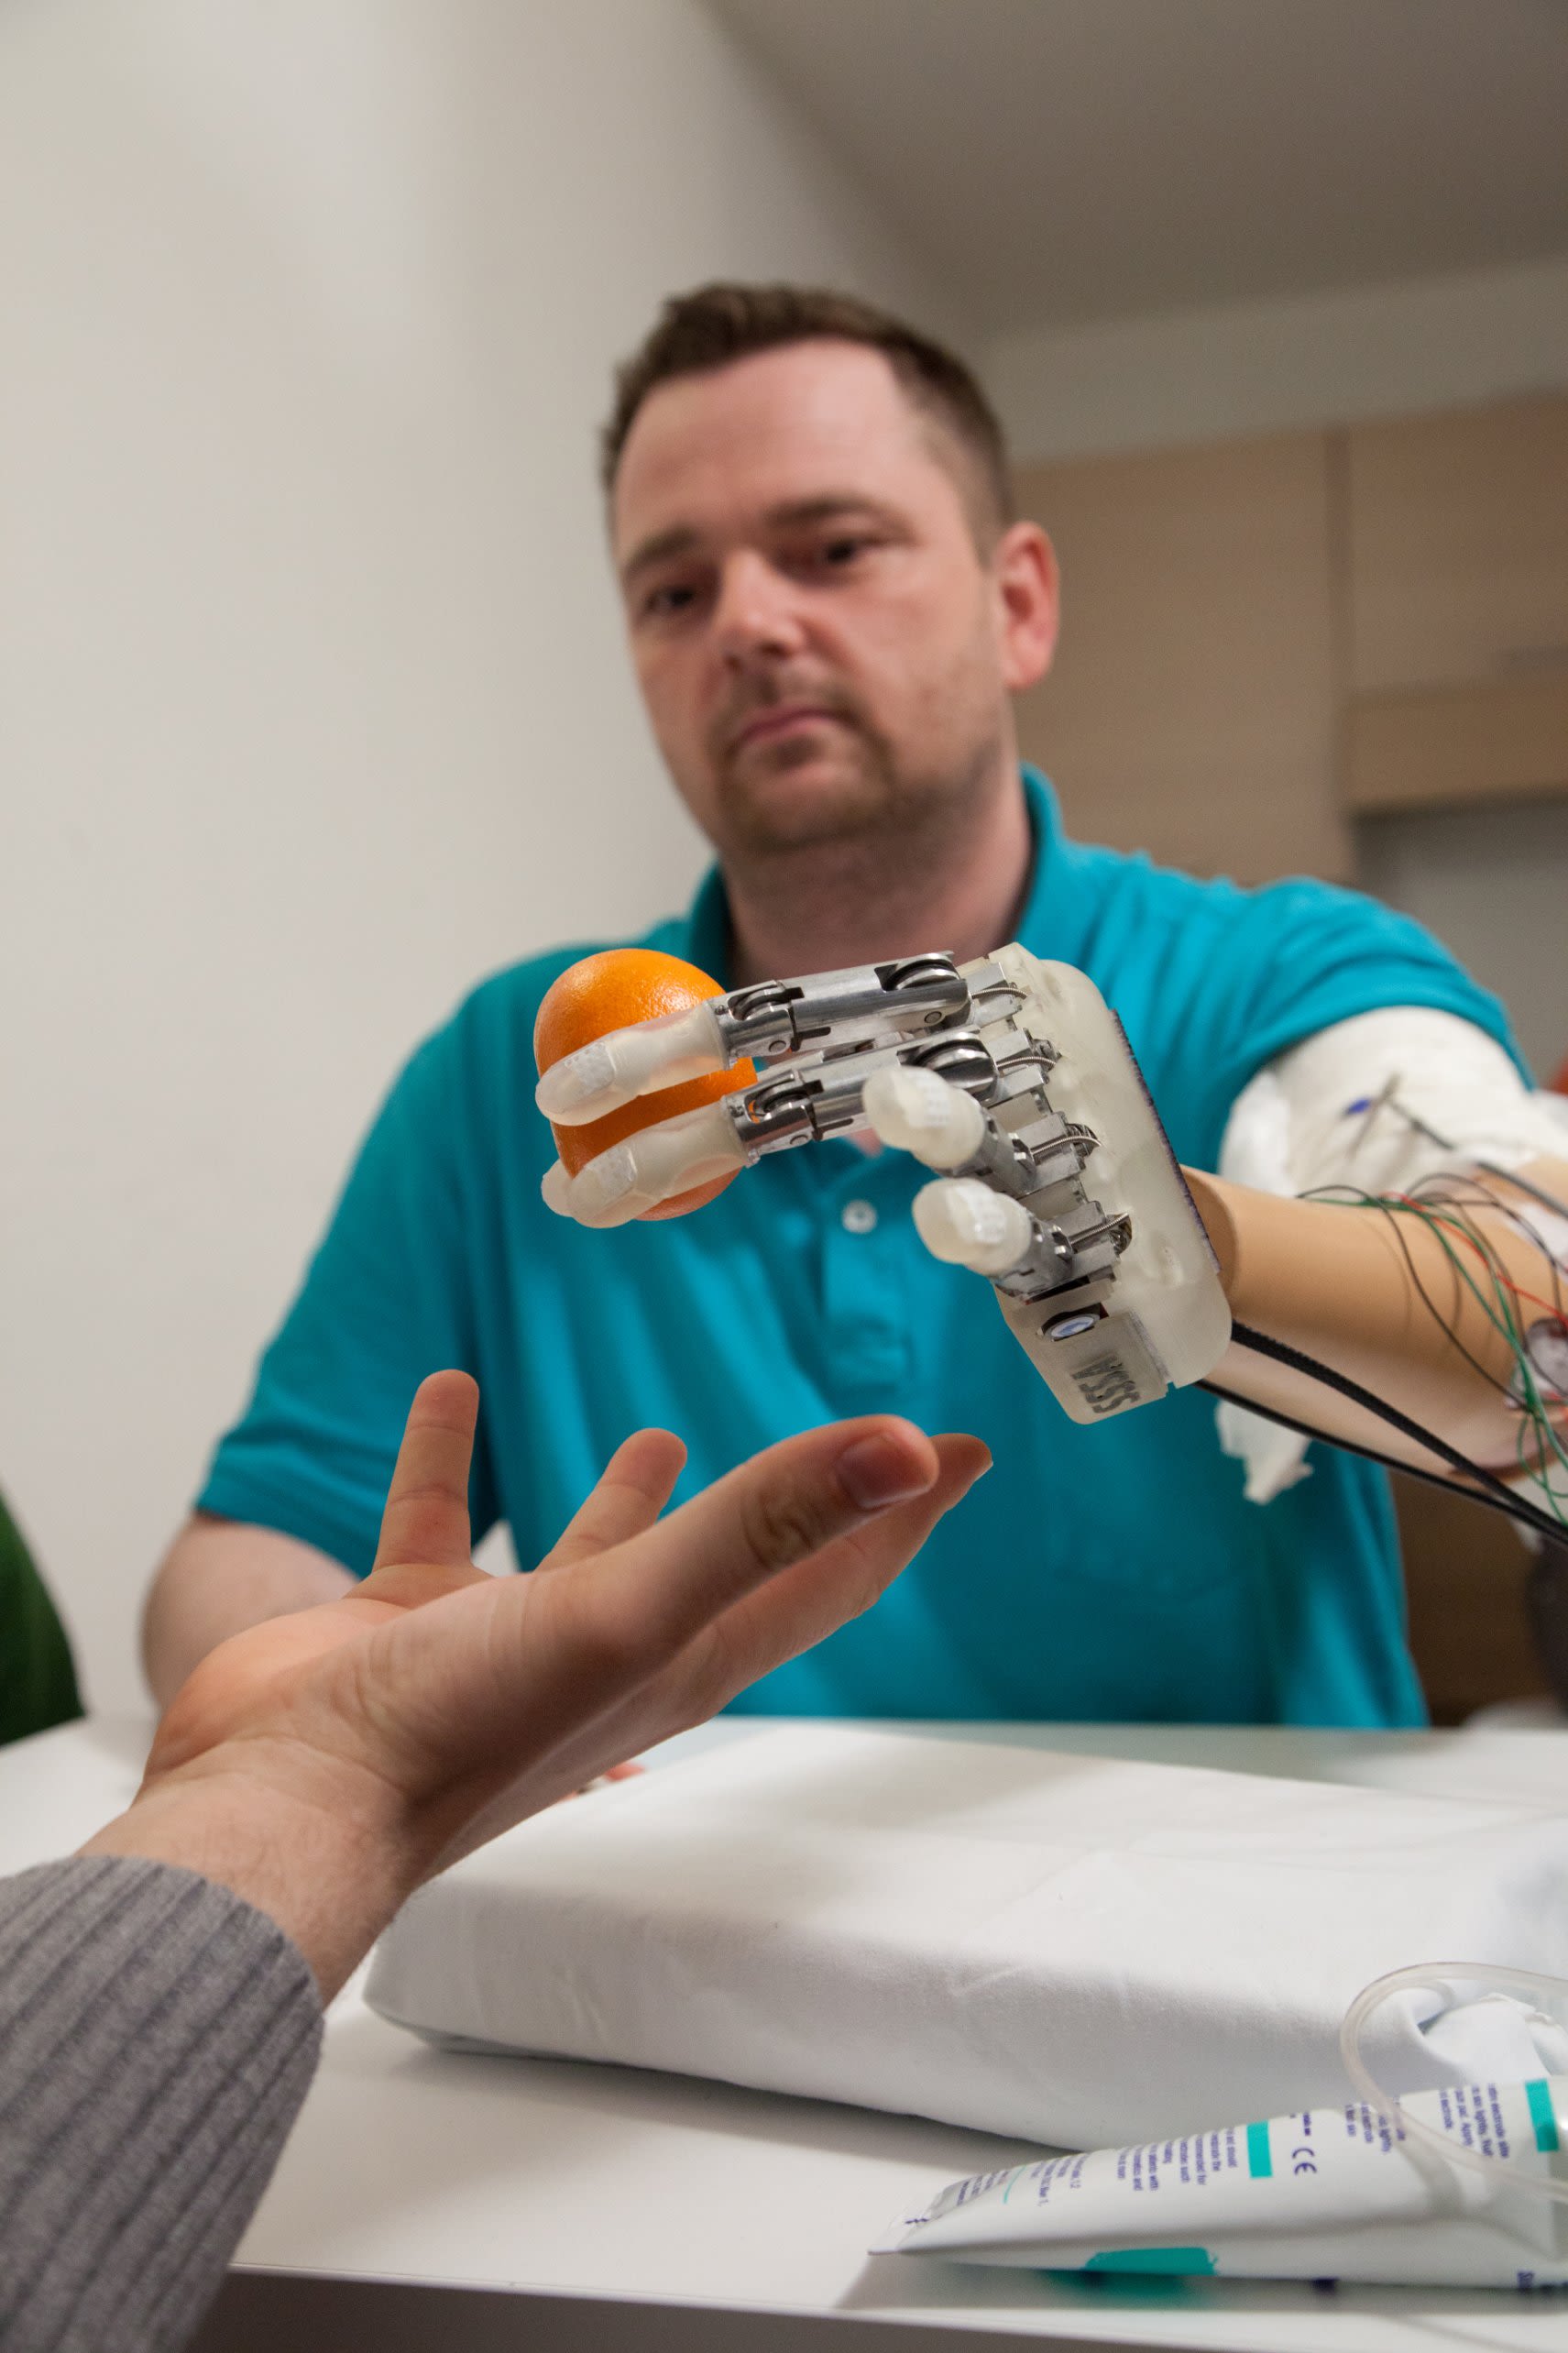 Artificial hand lets amputee feel objects